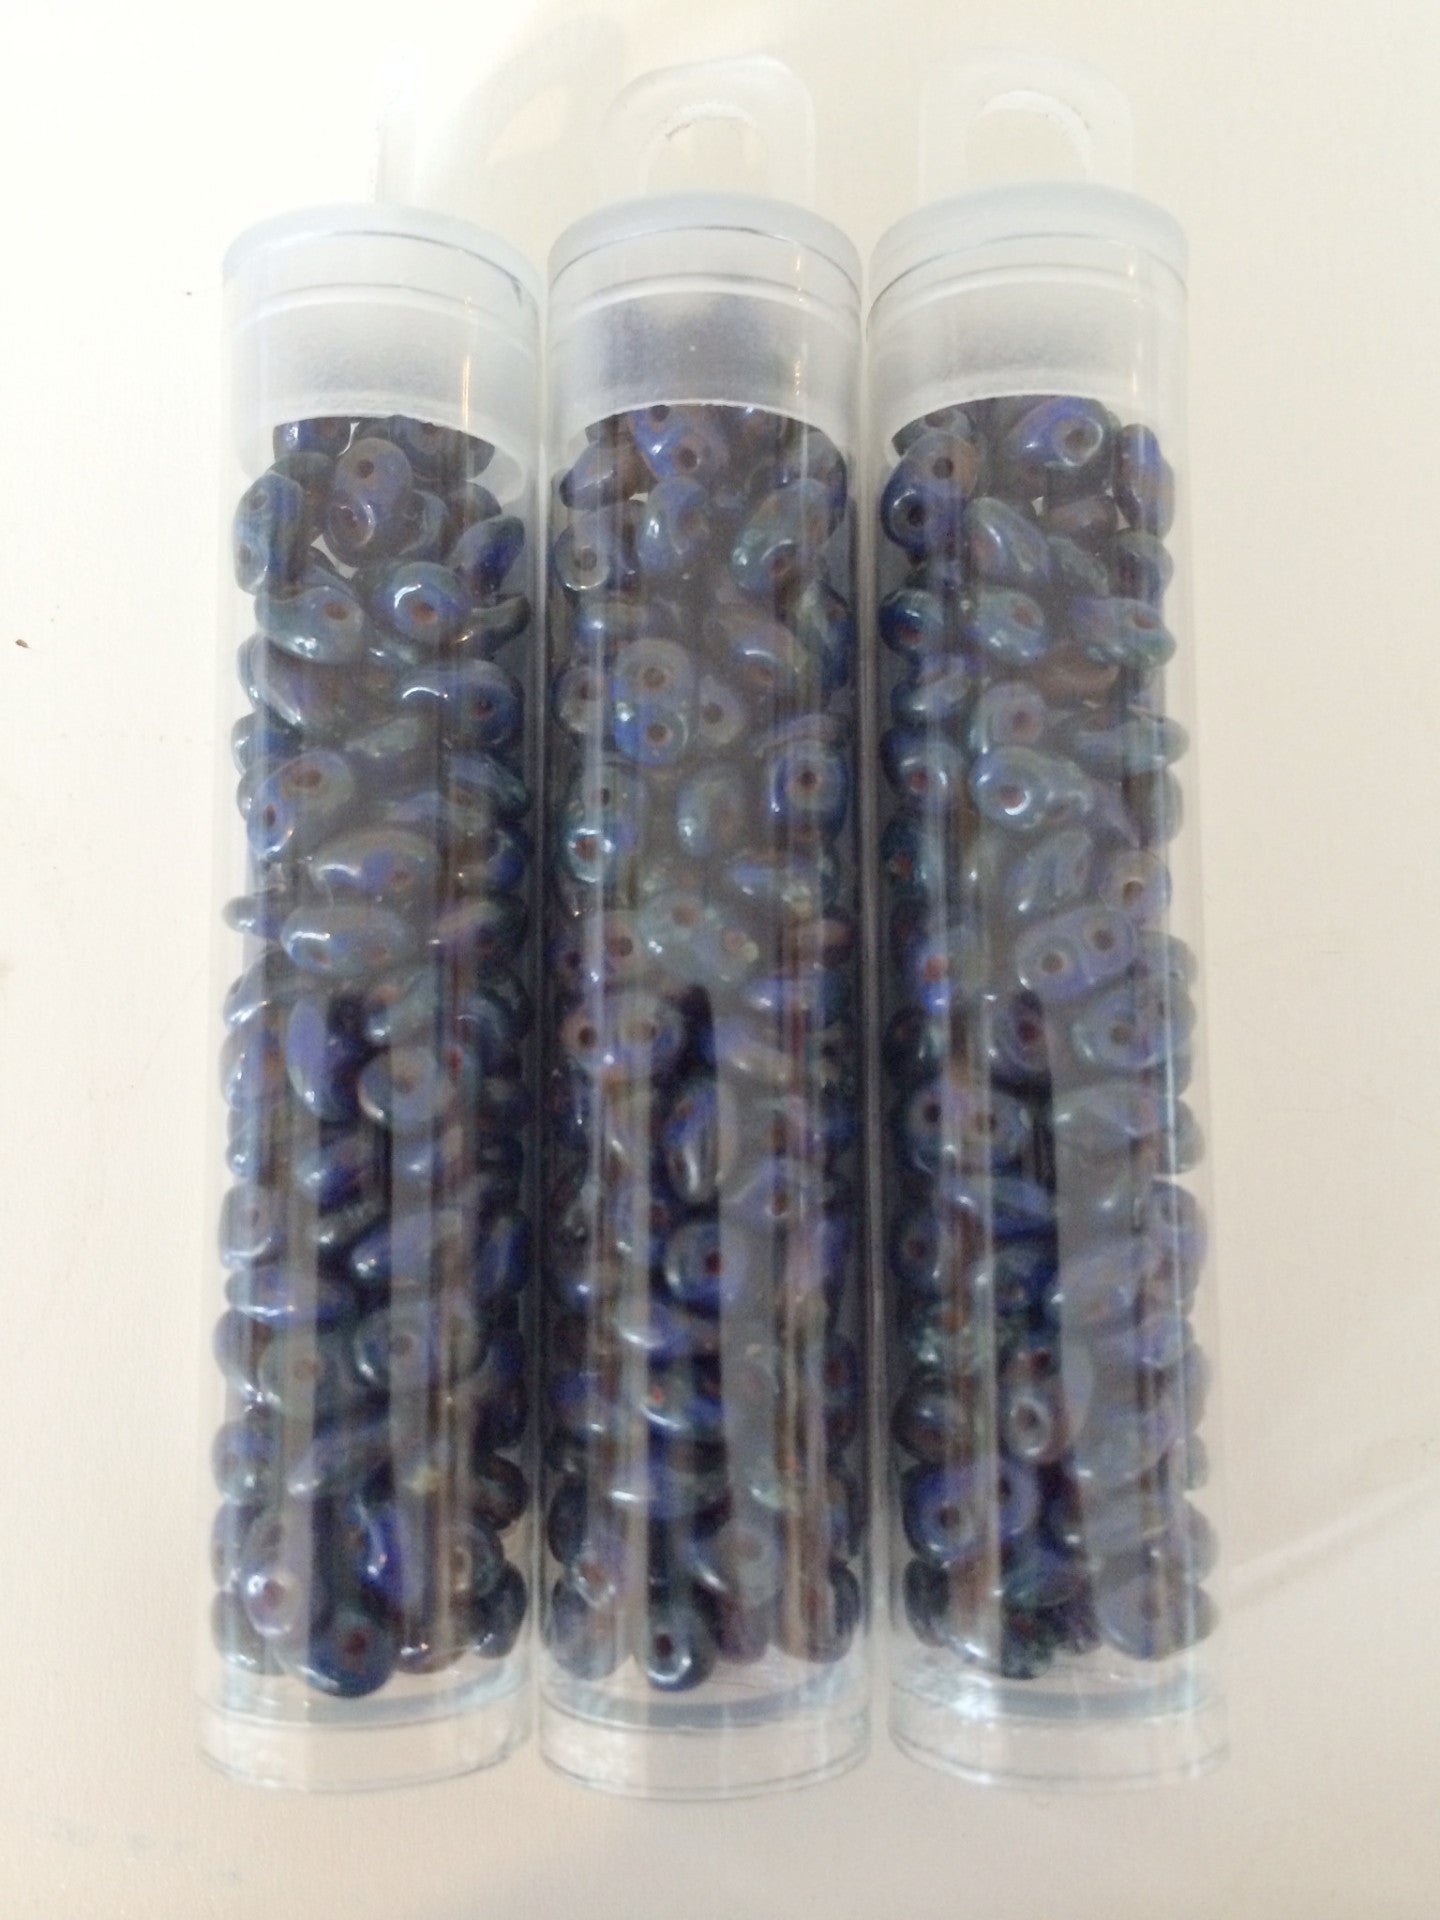 SuperDuo beads - Opaque Blue Picasso - Island Cove Beads & Gallery